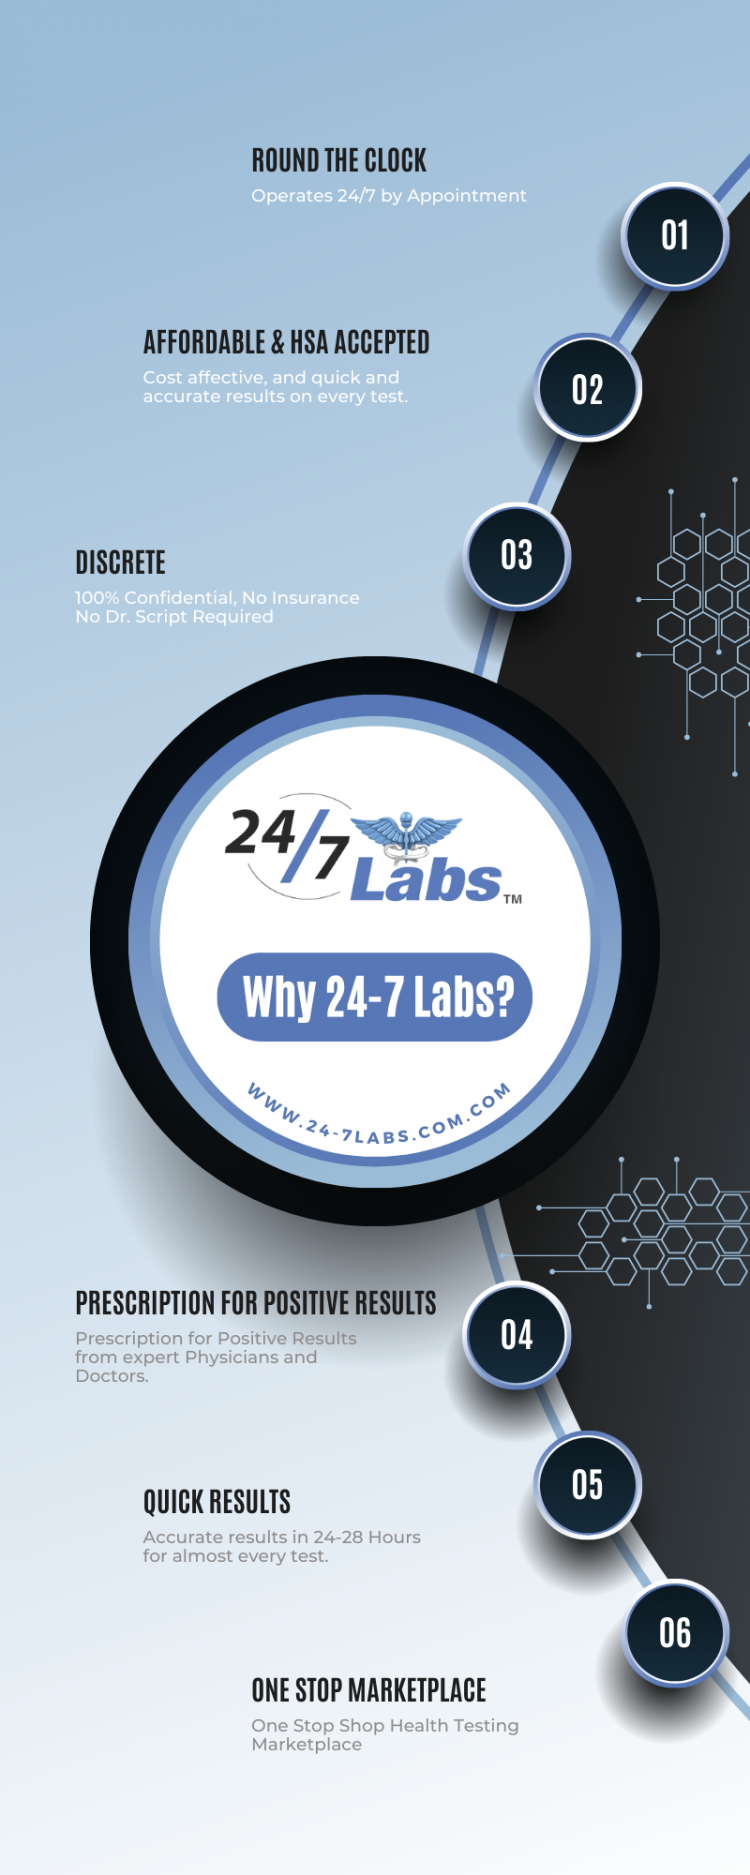 24-7 Labs offers a full range of professional and diagnostic testing services for every age group. We test for dozens of diseases and disorders, helping you to protect your health and well-being. Our mission is to give people the power to control their health by providing convenient, affordable, and easy to understand options. For more info, visit now - https://www.24-7labs.com/